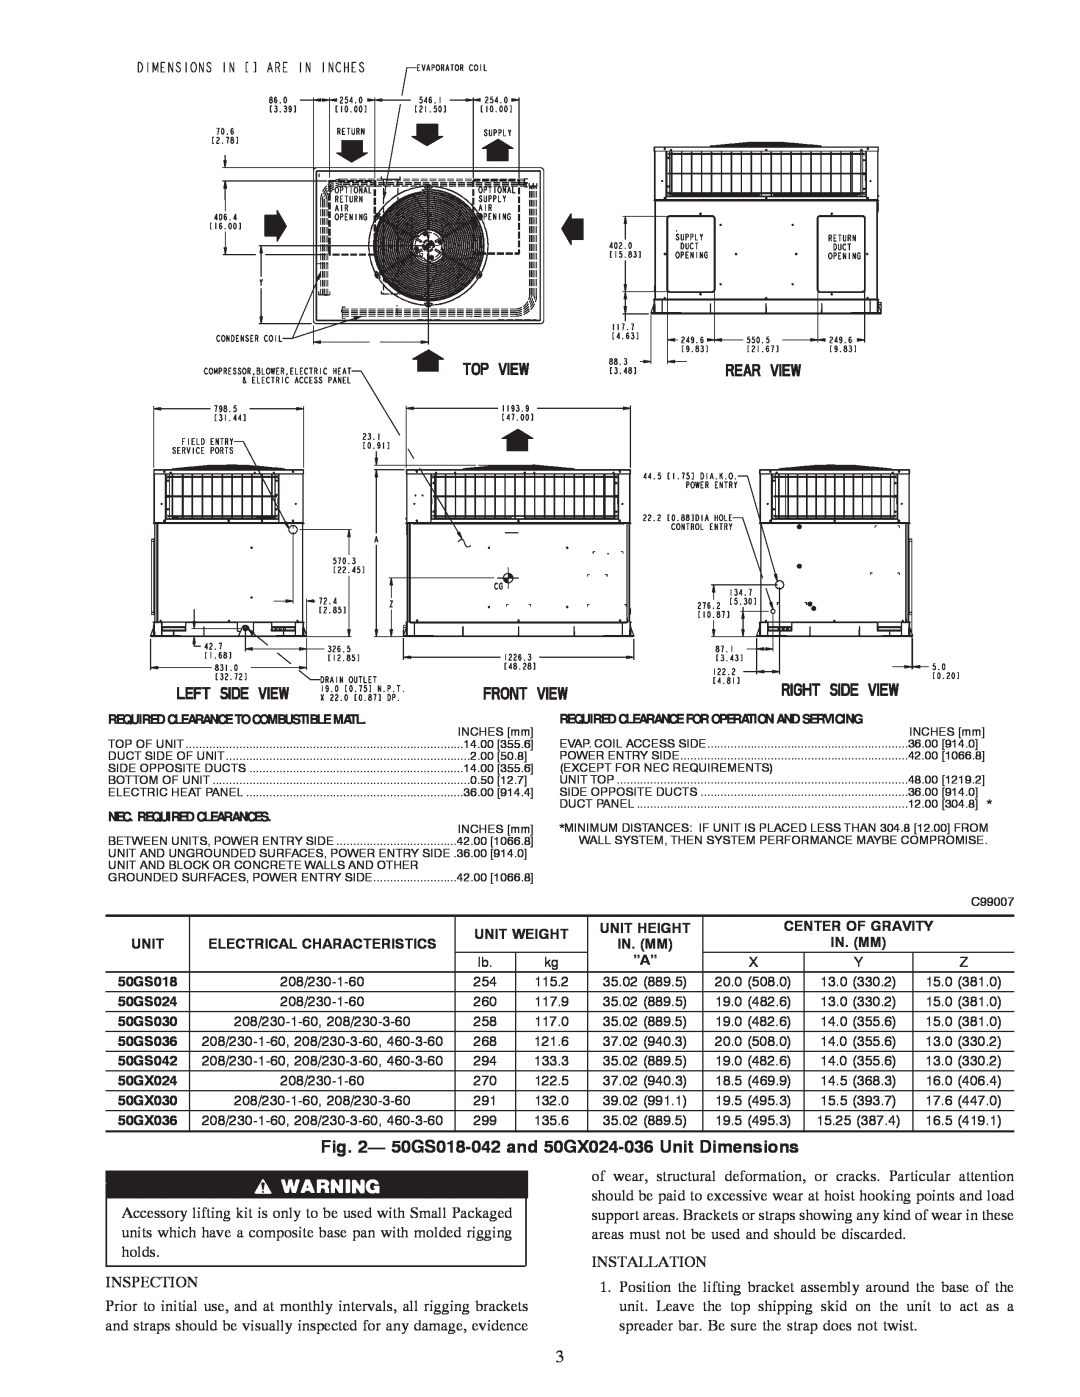 Carrier instruction manual 50GS018-042and 50GX024-036Unit Dimensions 